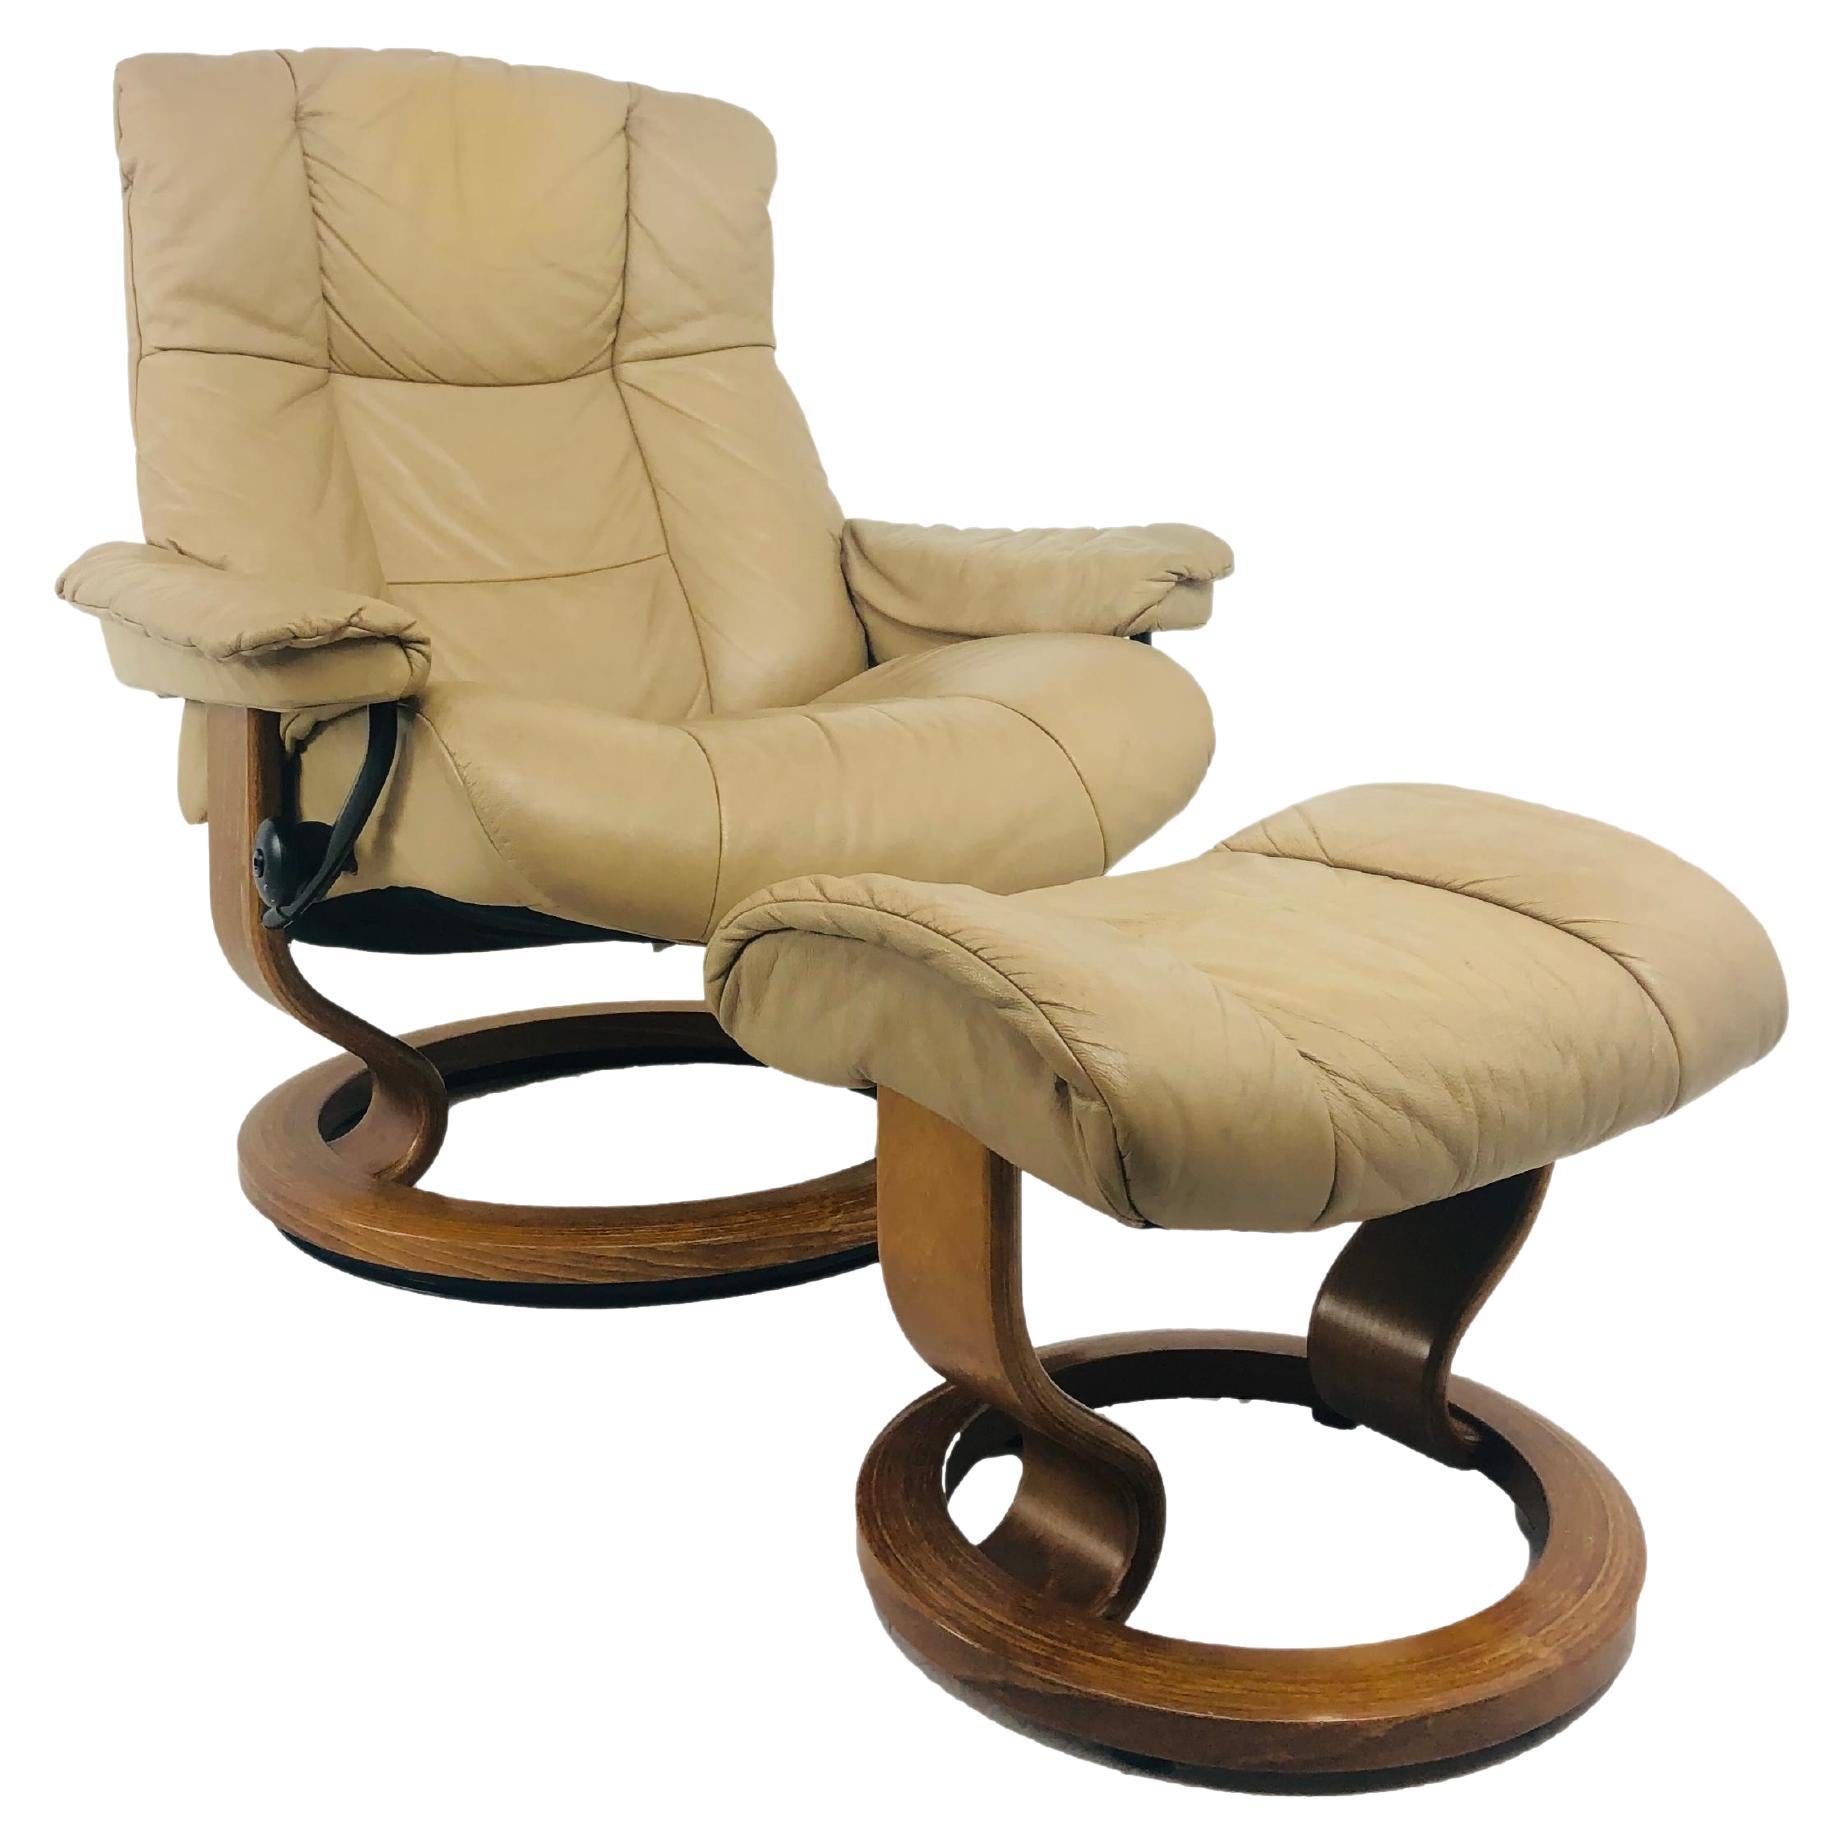 Can Stressless chairs be refurbished?